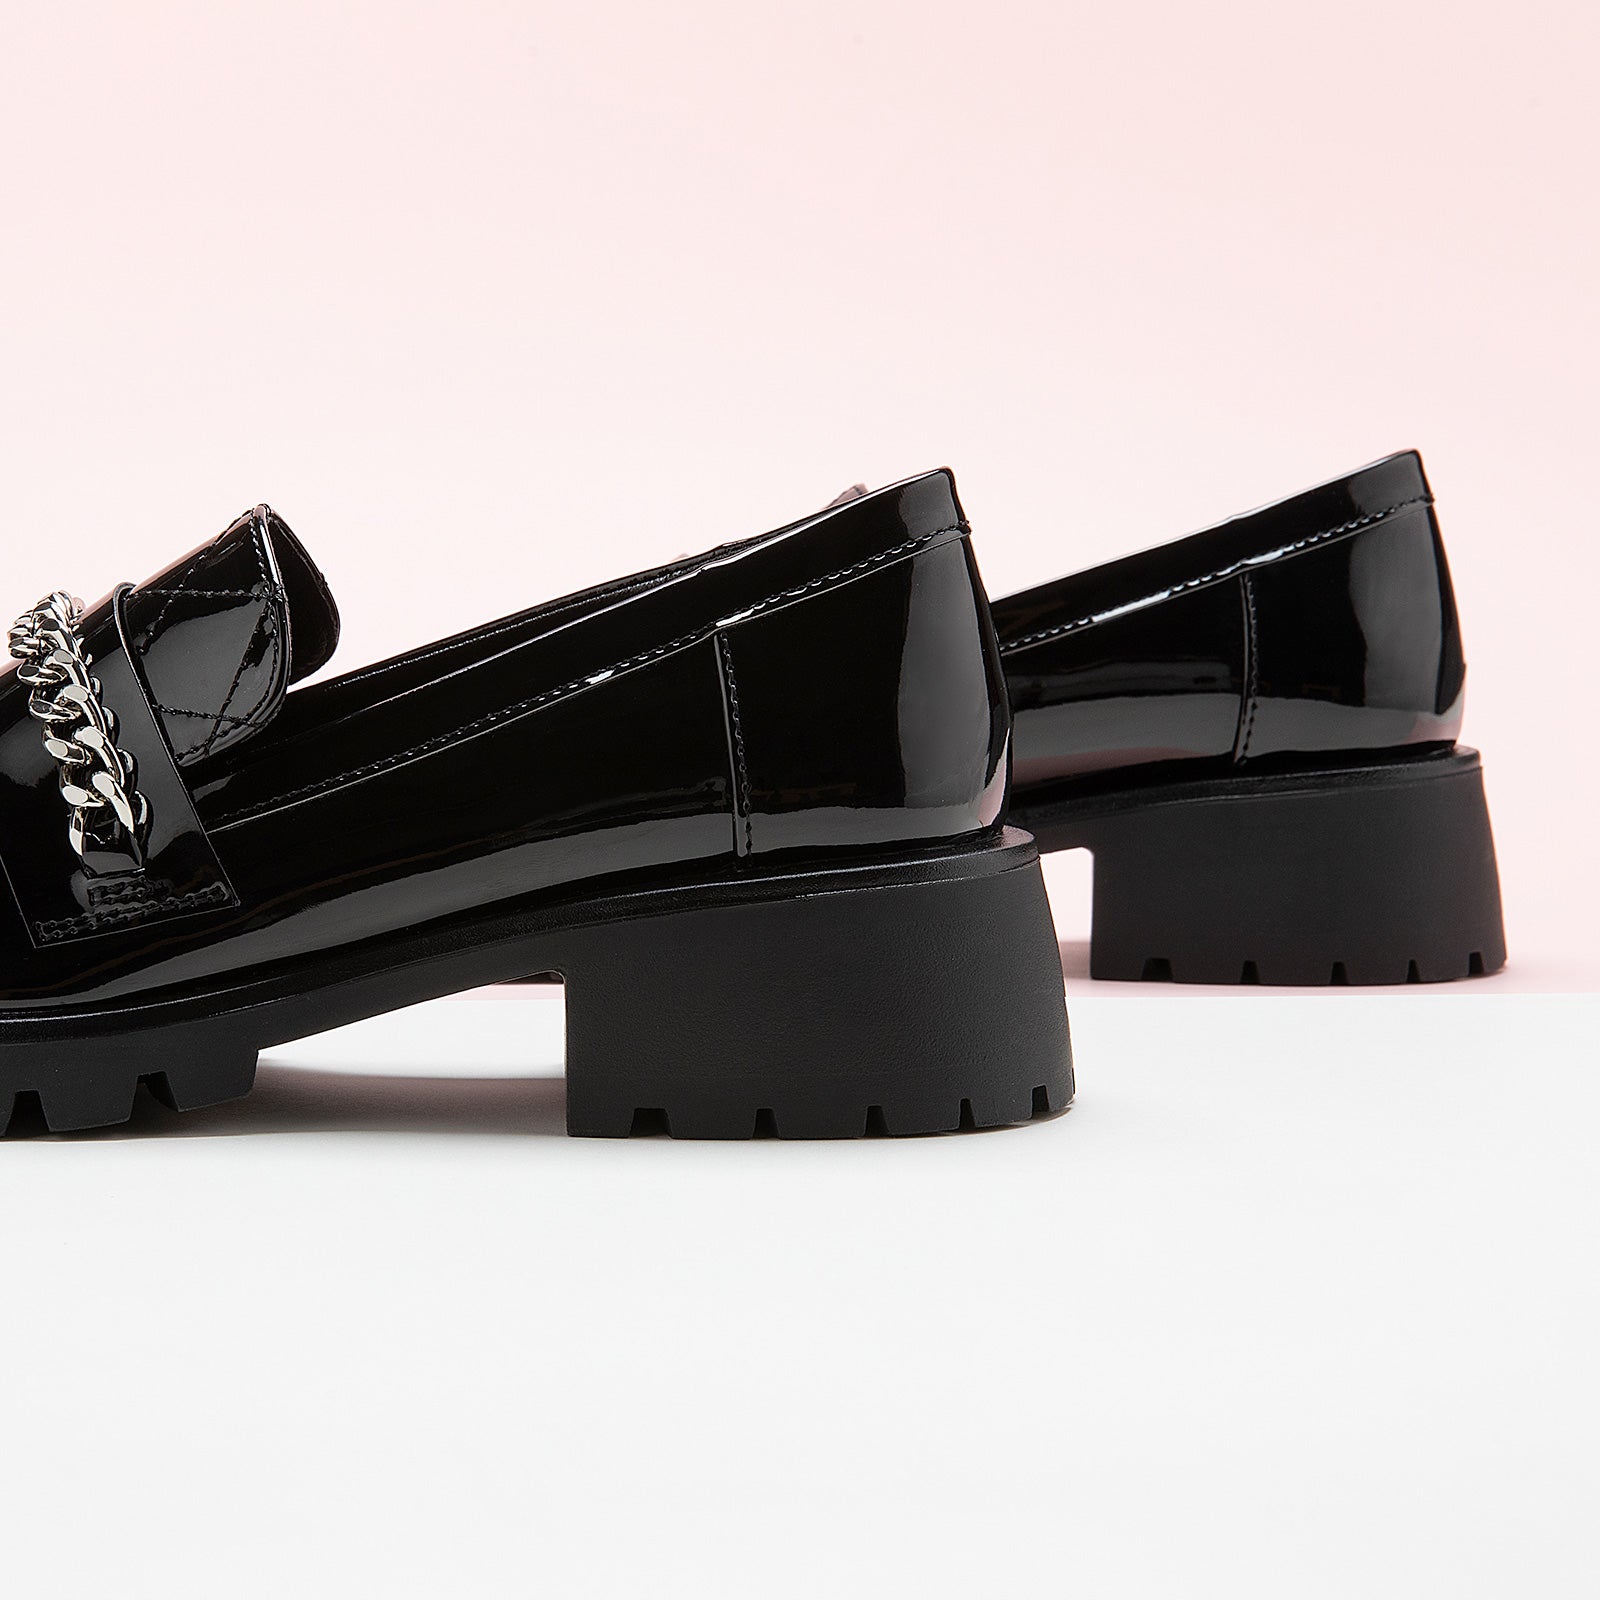  Black Metal Chain Platform Loafers, perfect for a confident and fashionable look in any urban setting